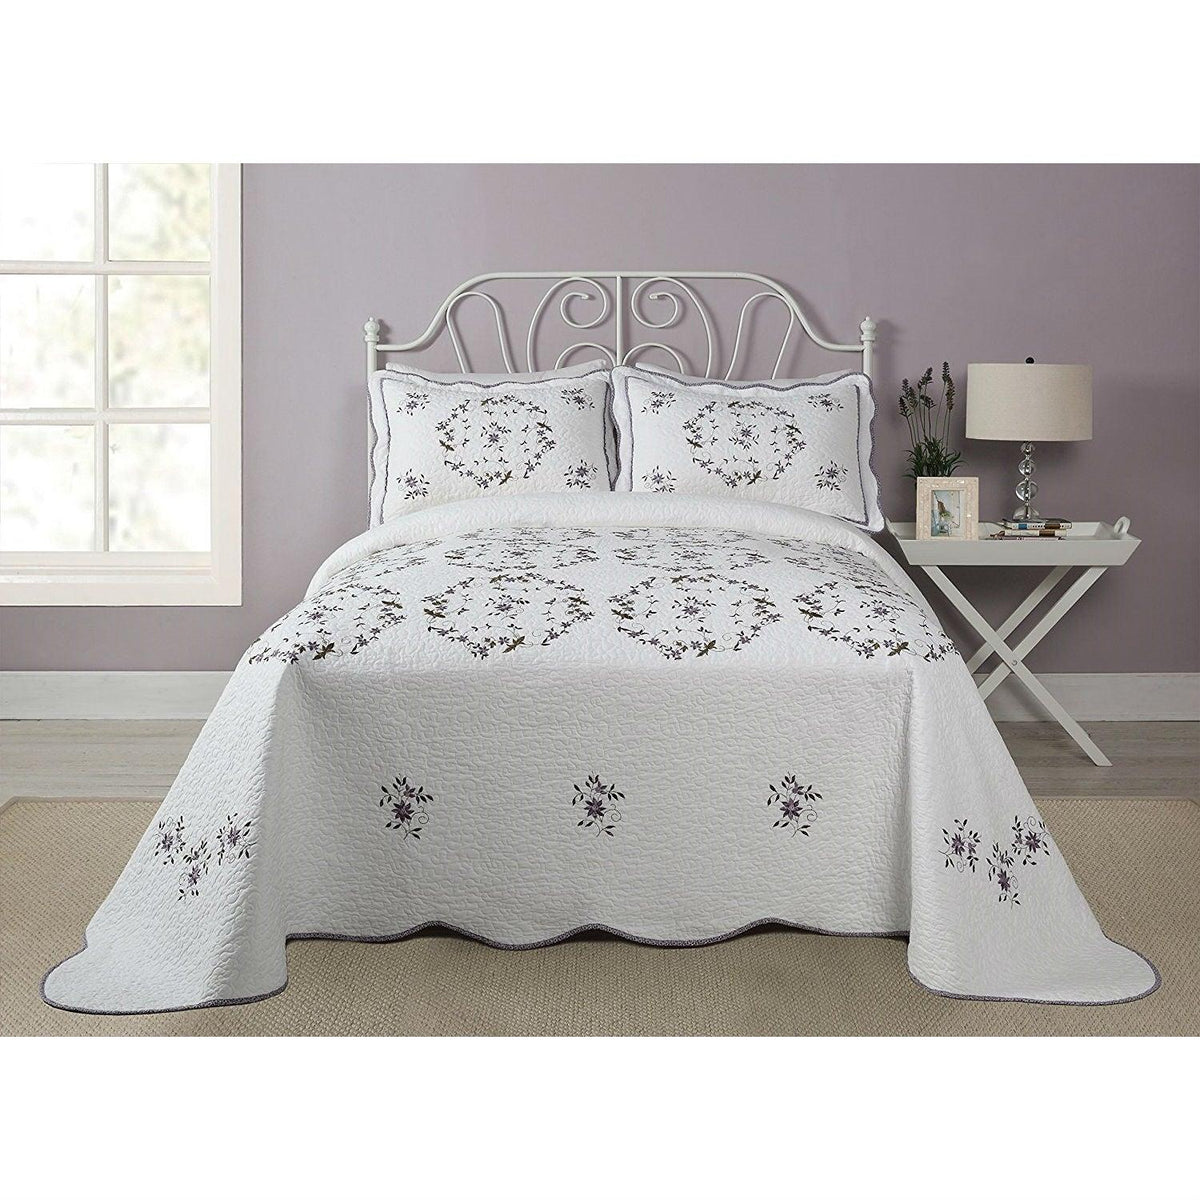 King size Cotton Bedspread with Scalloped Edges in White with Floral Print Embroidery - beddingbag.com